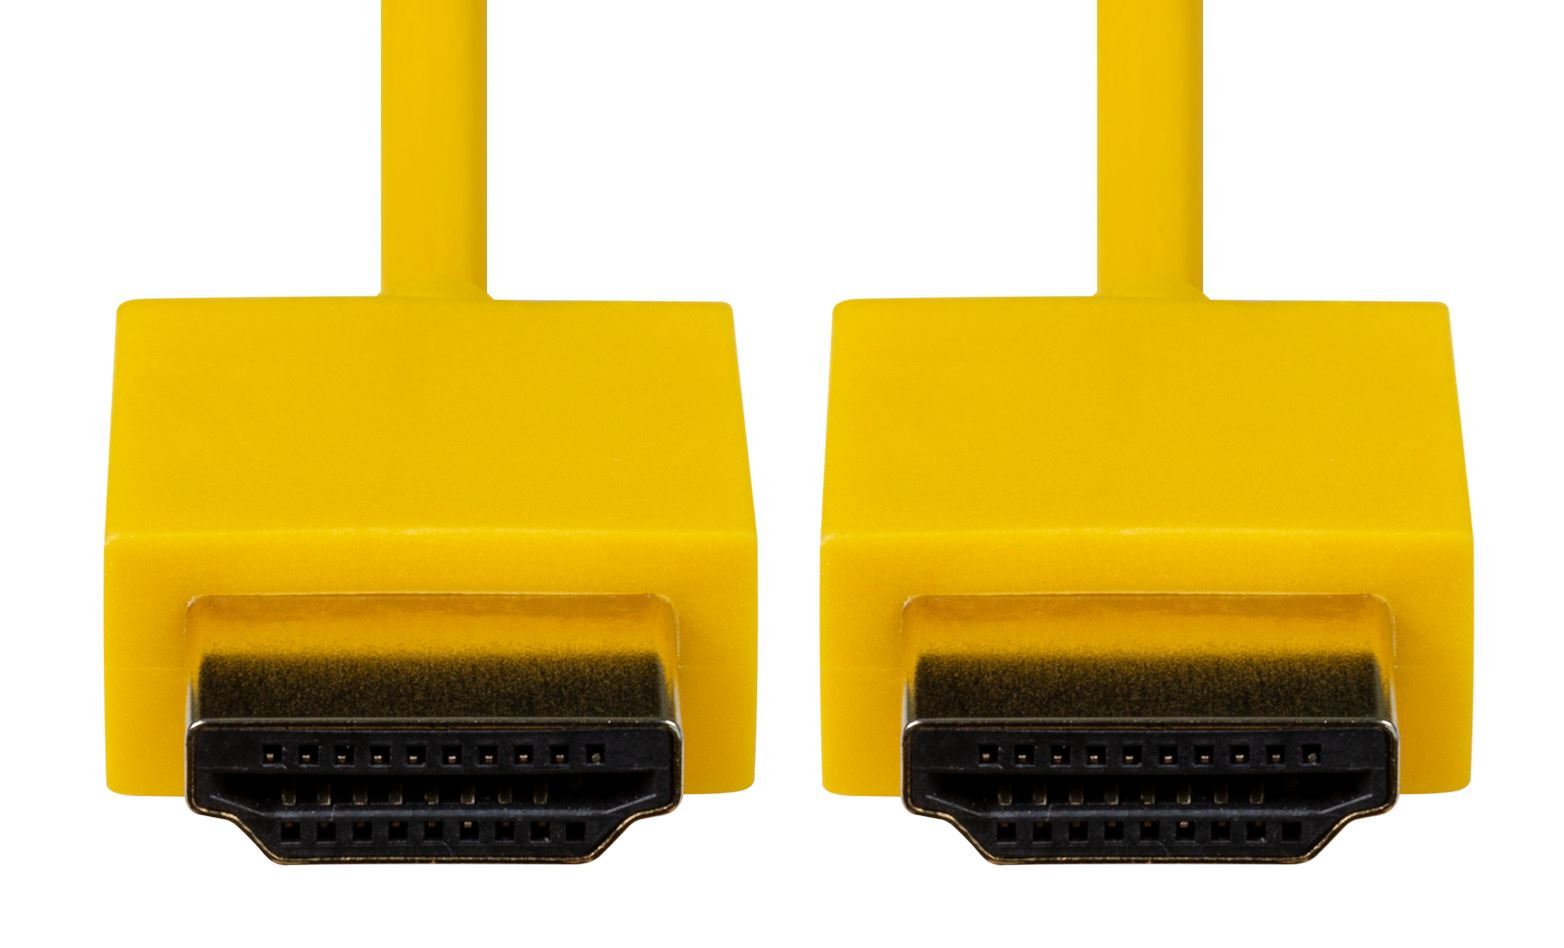 DYNAMIX_2M_HDMI_YELLOW_Nano_High_Speed_With_Ethernet_Cable._Designed_for_UHD_Display_up_to_4K2K@60Hz._Slimline_Robust_Cable._Supports_CEC_2.0,_3D,_&_ARC._Supports_Up_to_32_July_ON_SALE_-_Up_to_50%_OFF 806